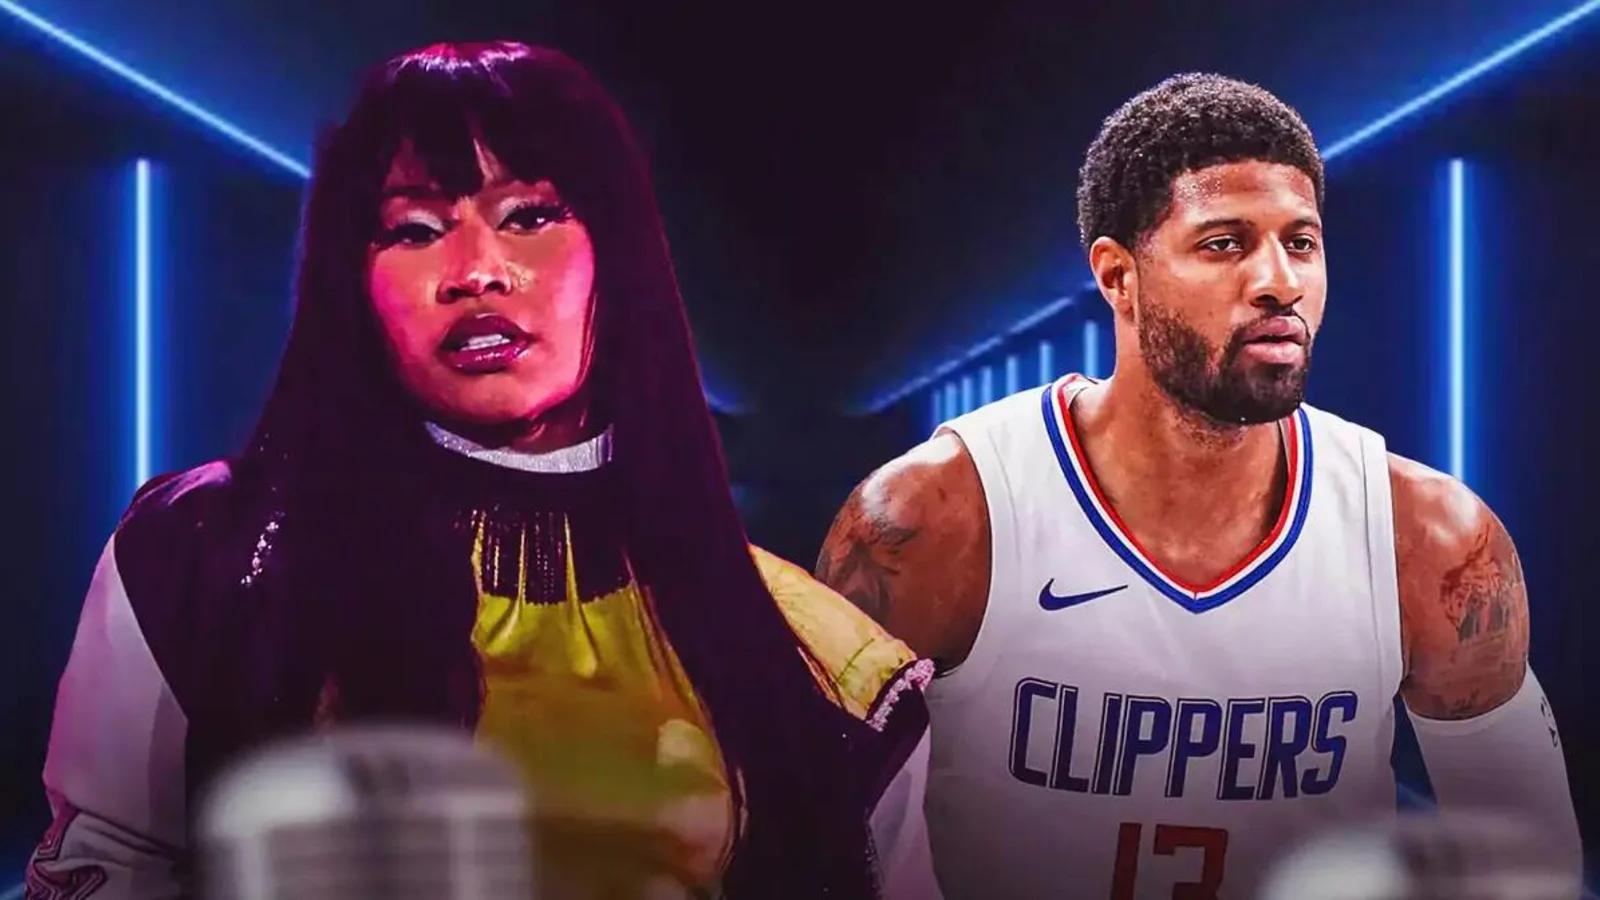 Clippers’ Paul George reveals Nicki Minaj asked him to be in her music video